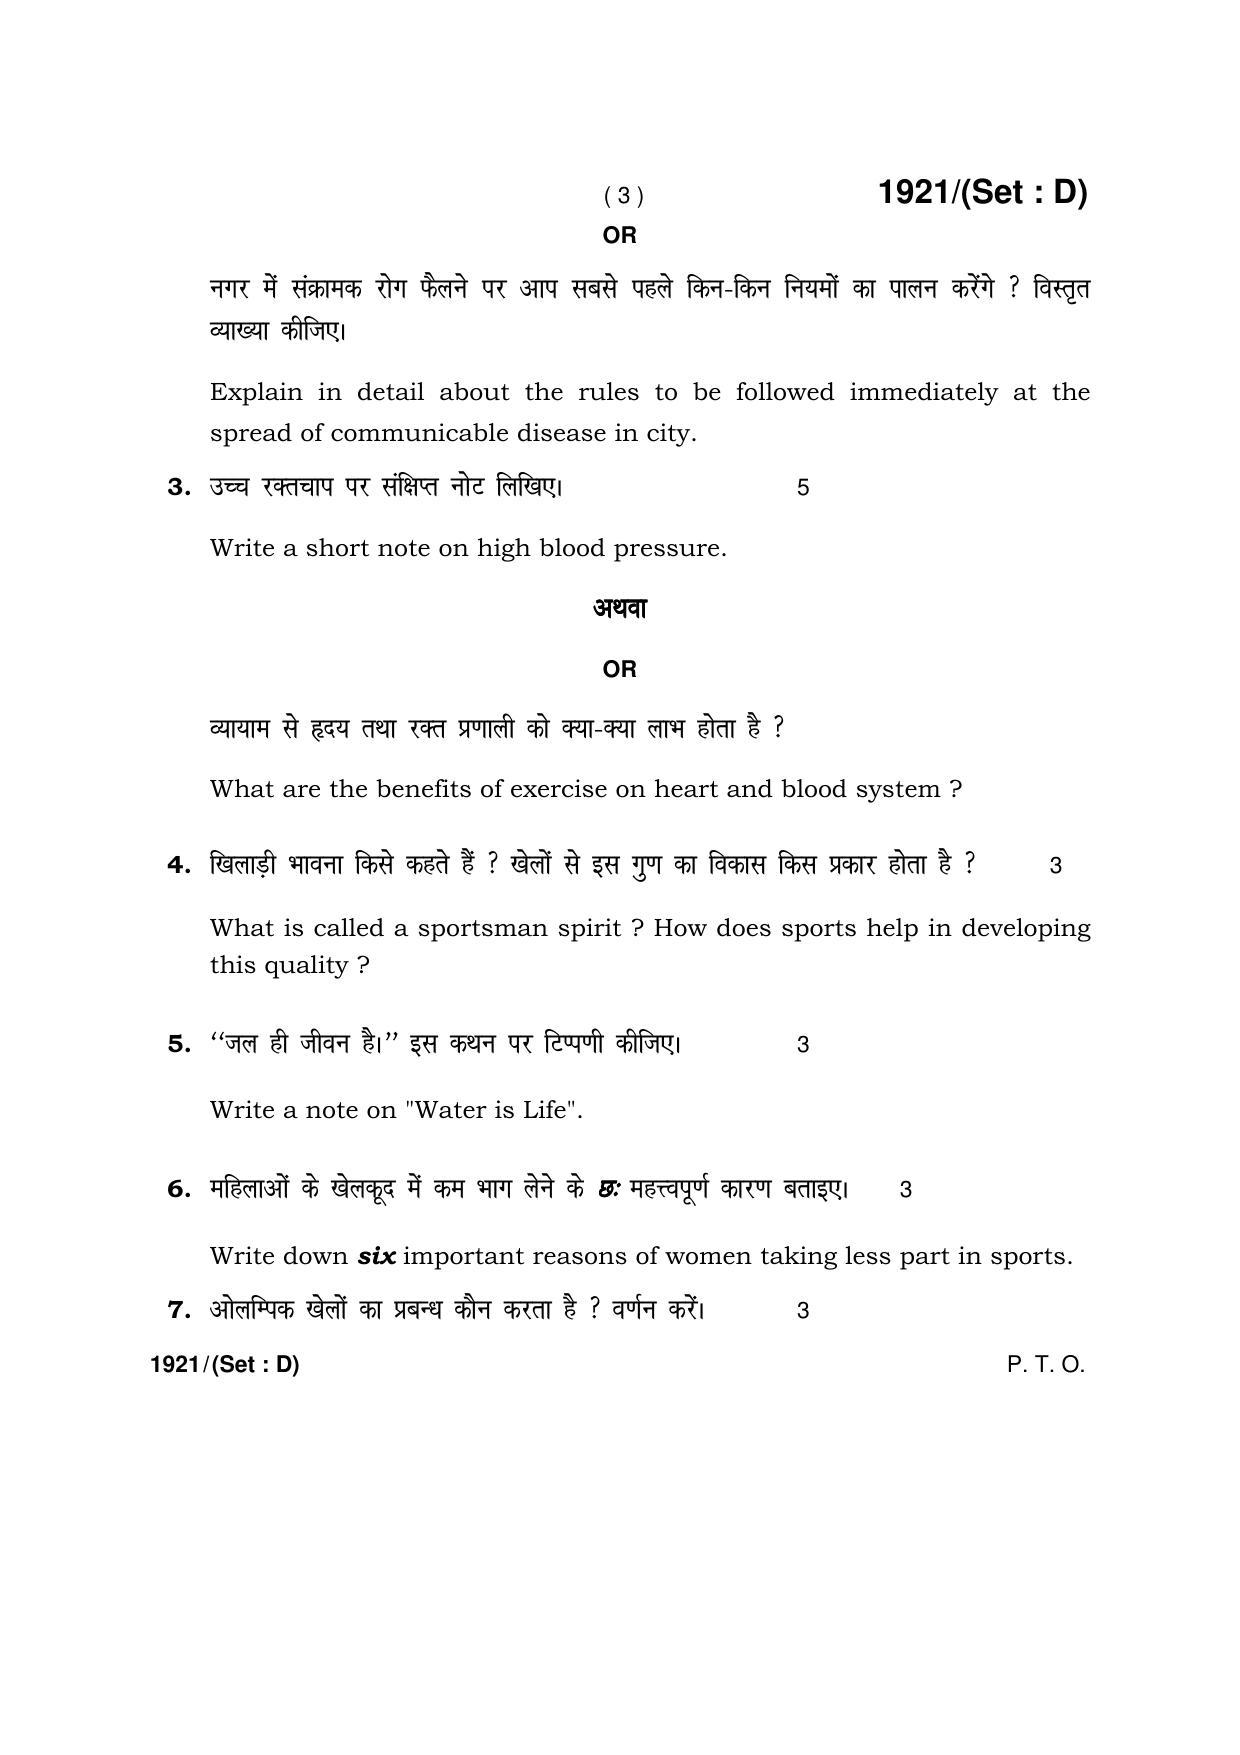 Haryana Board HBSE Class 10 Health & Physical Education -D 2017 Question Paper - Page 3